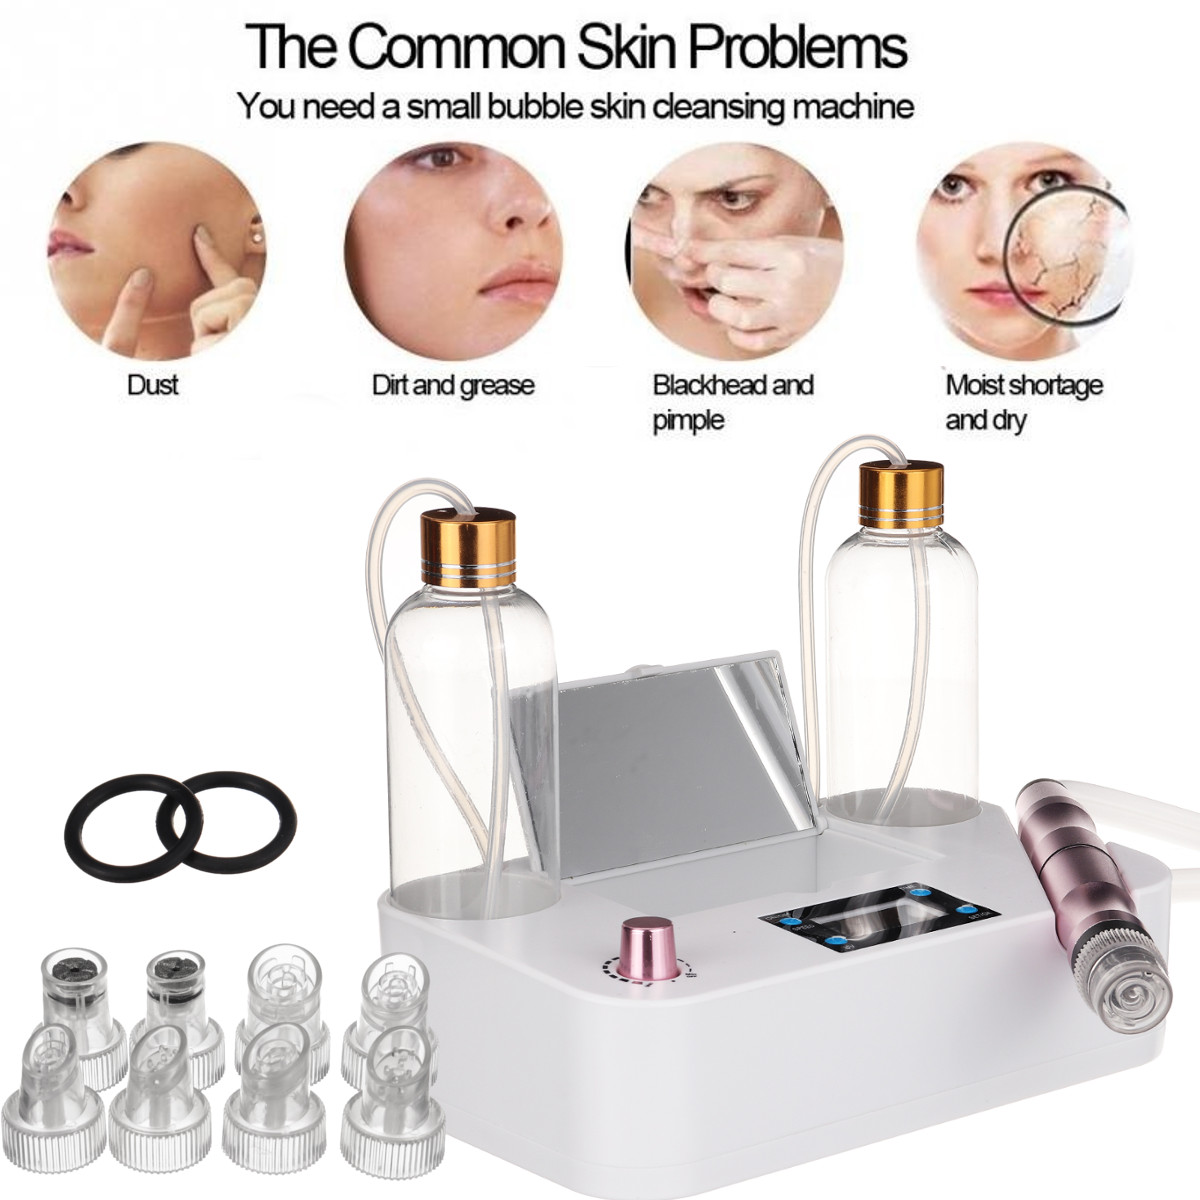 Micro-Small-Bubble-Facial-Cleaning-Face-Skin-Exfoliating-Machine-Whitening-Anti-aging-Acne-Moisturiz-1708280-2